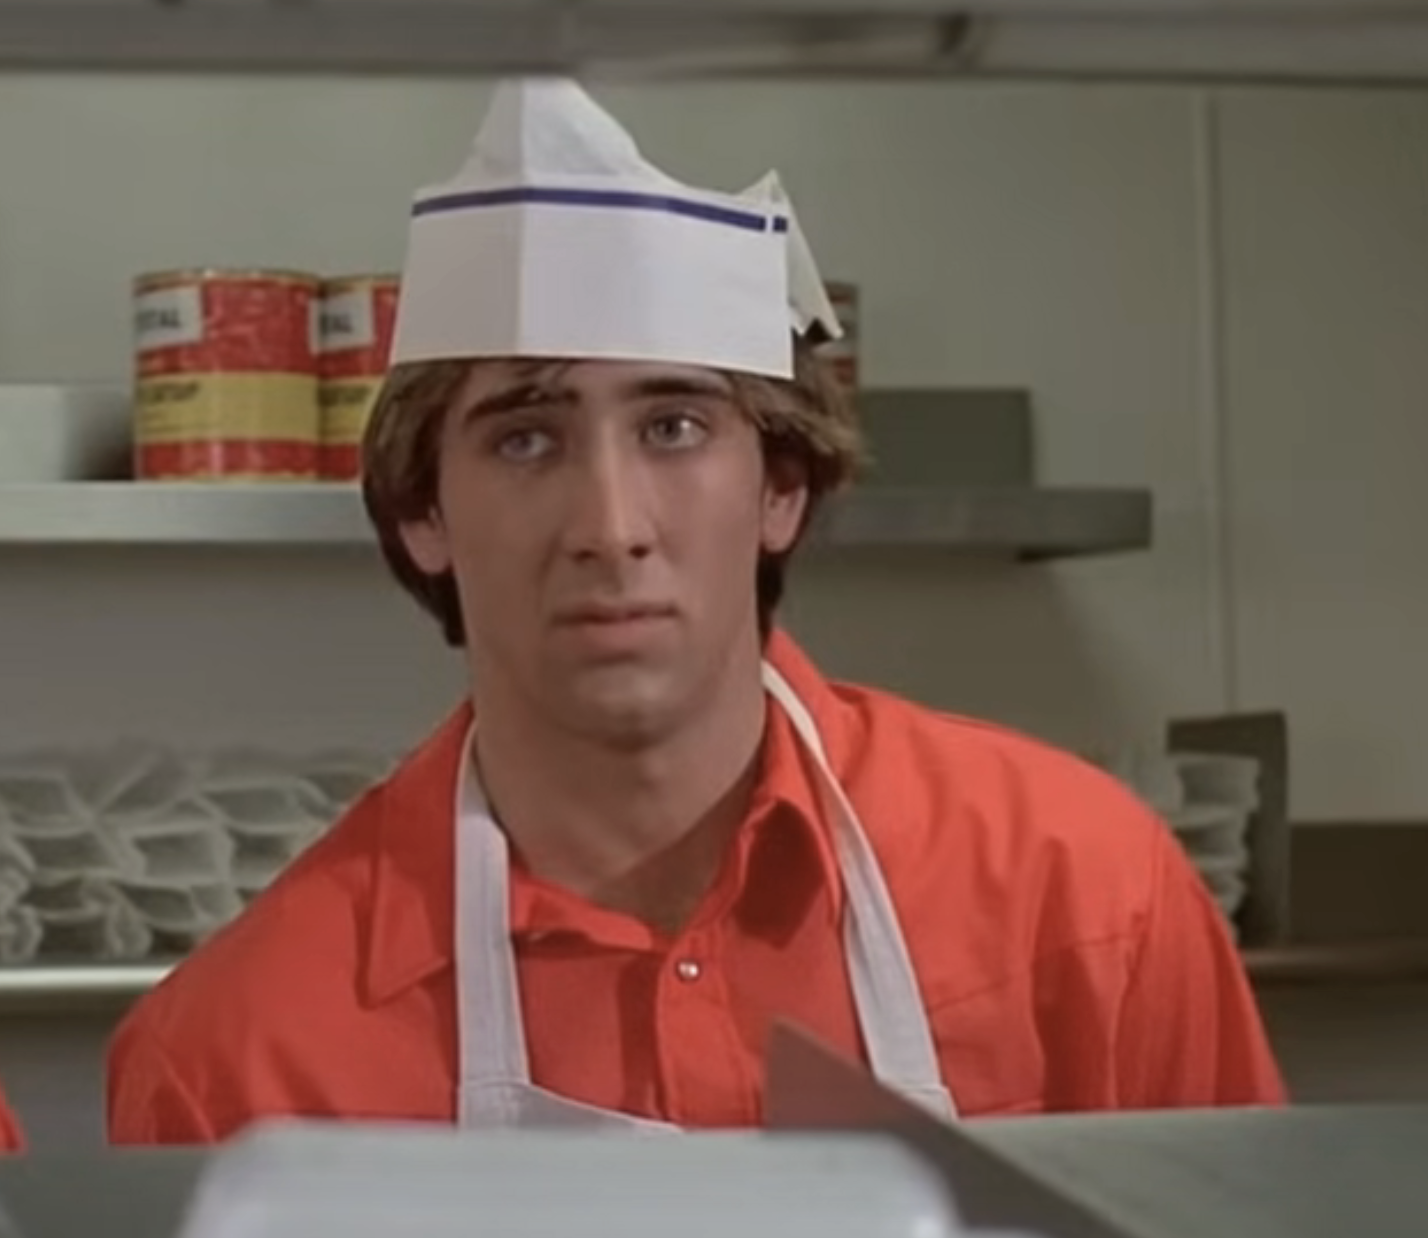 in a scene, Nic in a chef&#x27;s hat and apron appears concerned in a kitchen setting